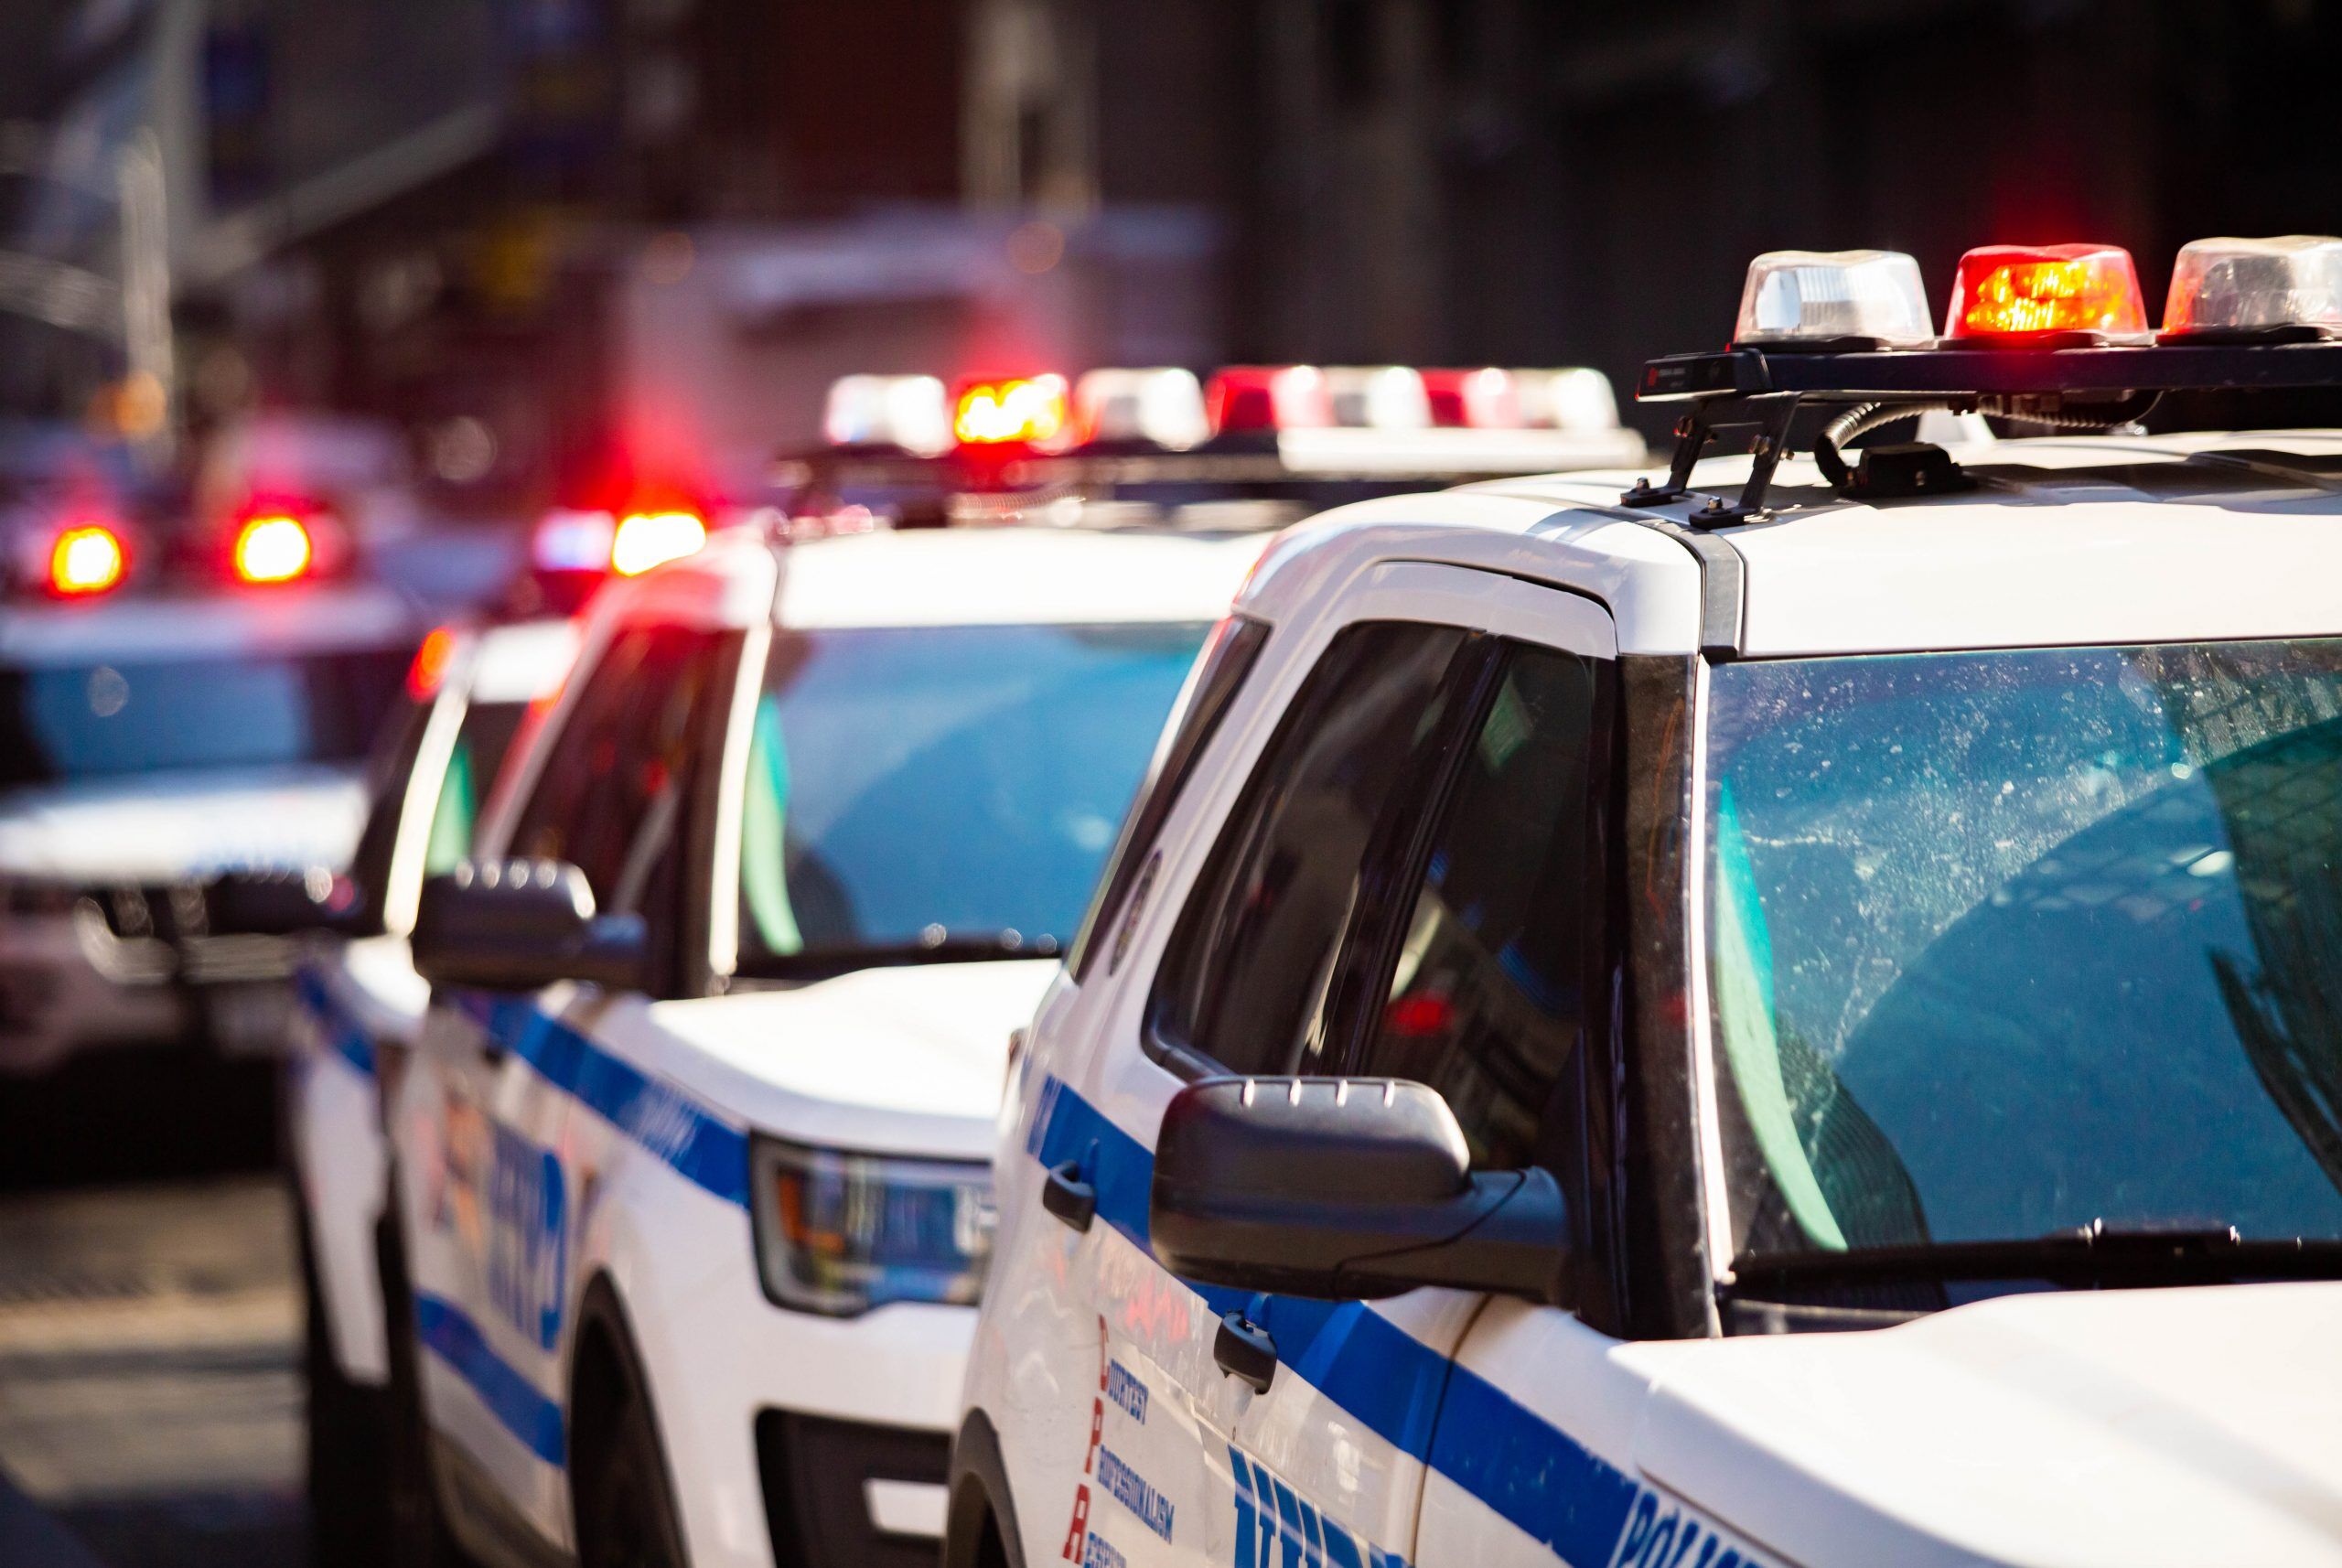 NYPD cruisers